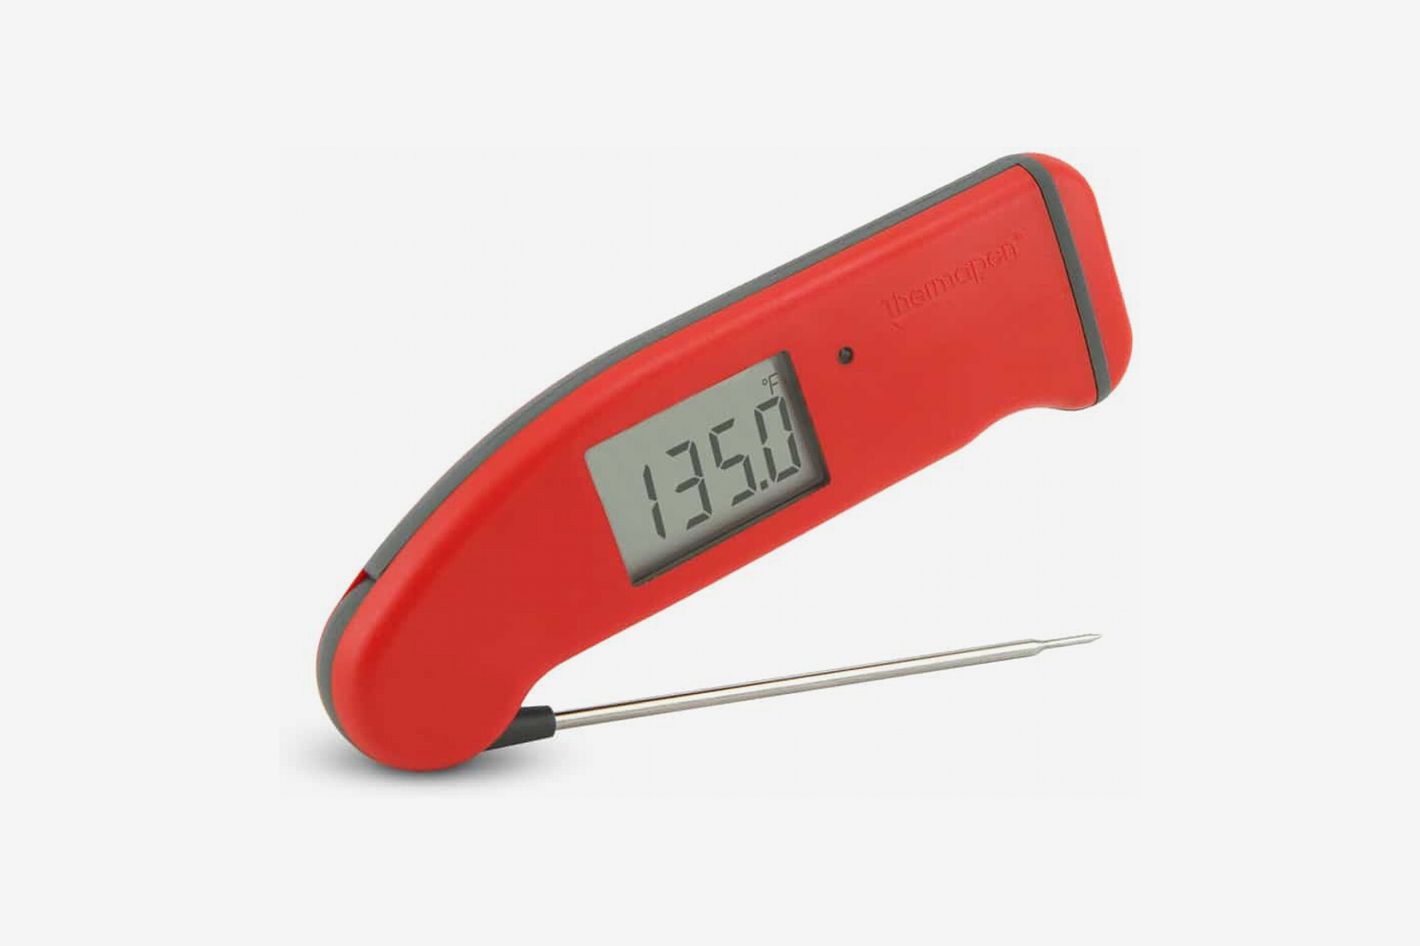 https://pyxis.nymag.com/v1/imgs/94c/b1f/e7788c19ce077aa262d1b3ab1207880057-thermapen-thermoworks.2x.h473.w710.jpg